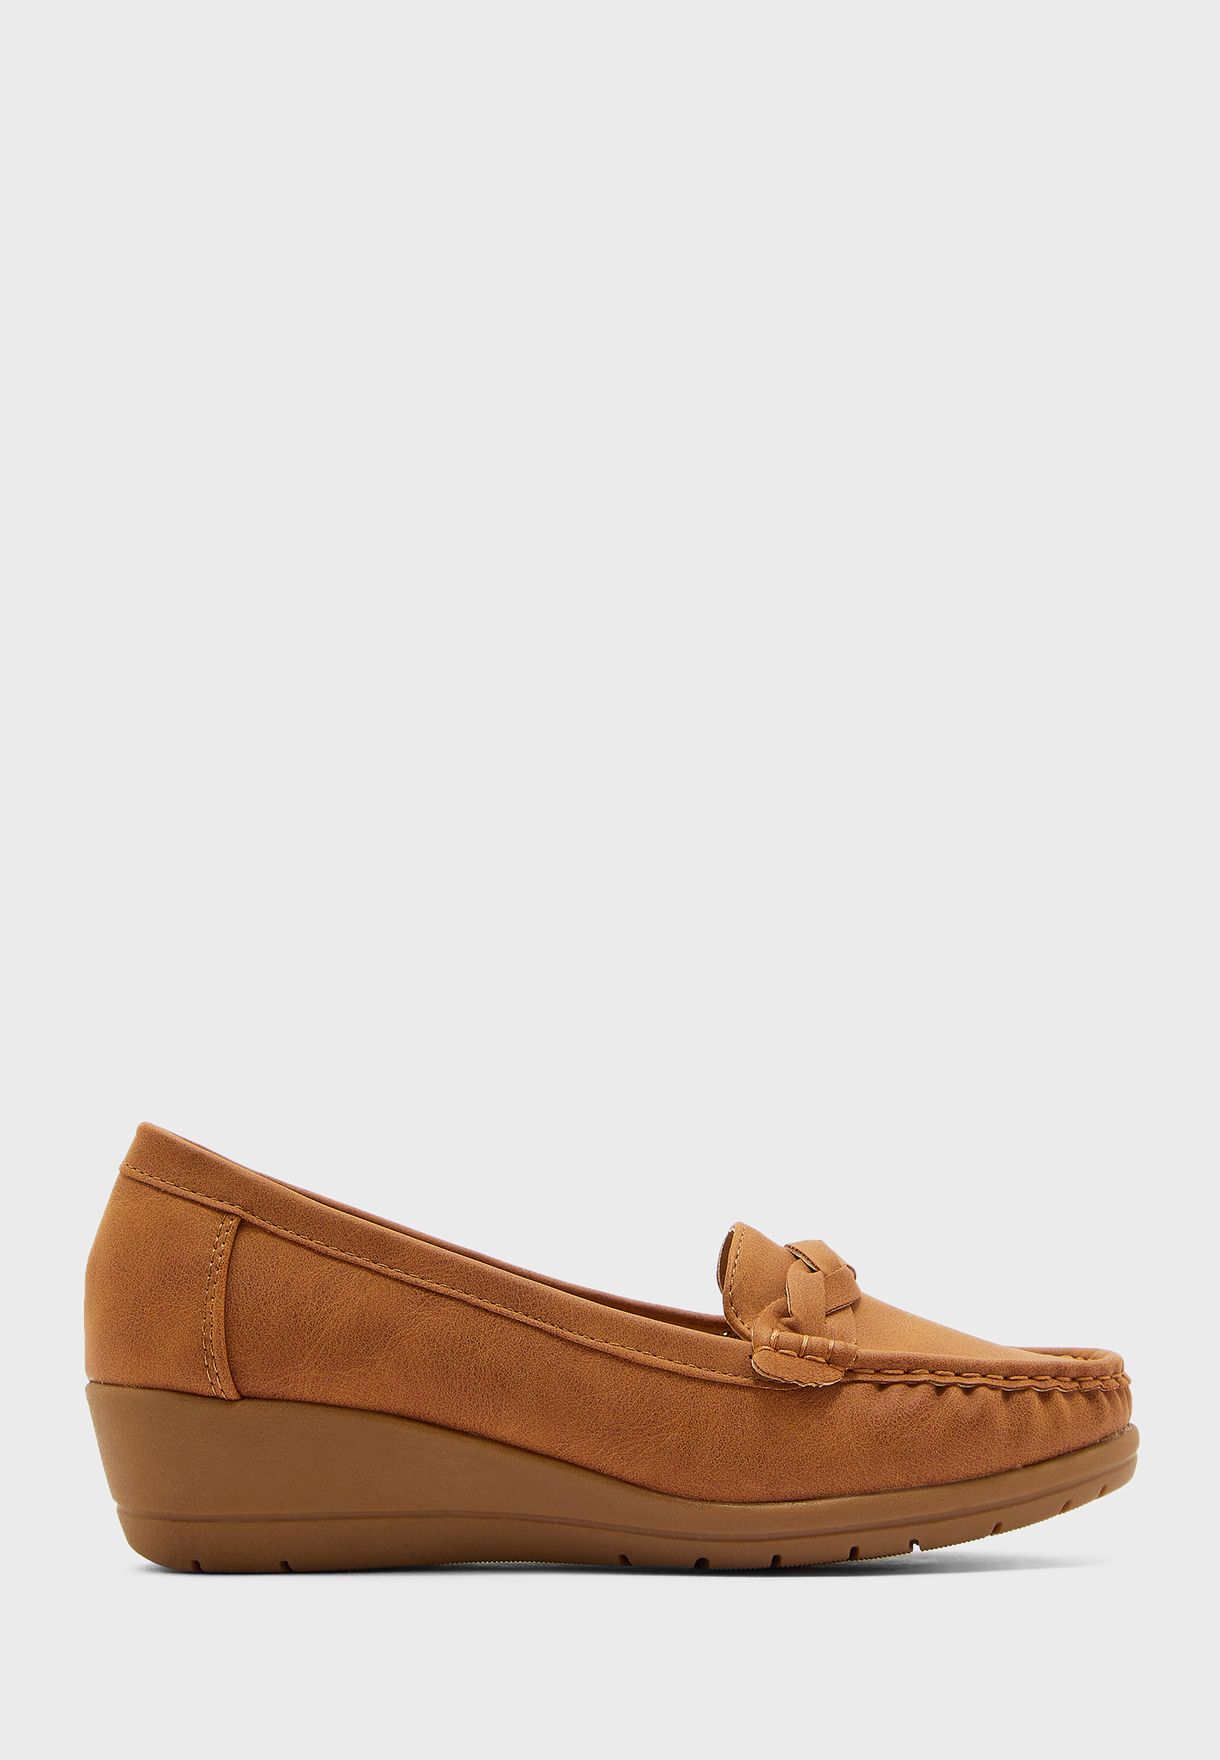 mast and harbour loafer shoes